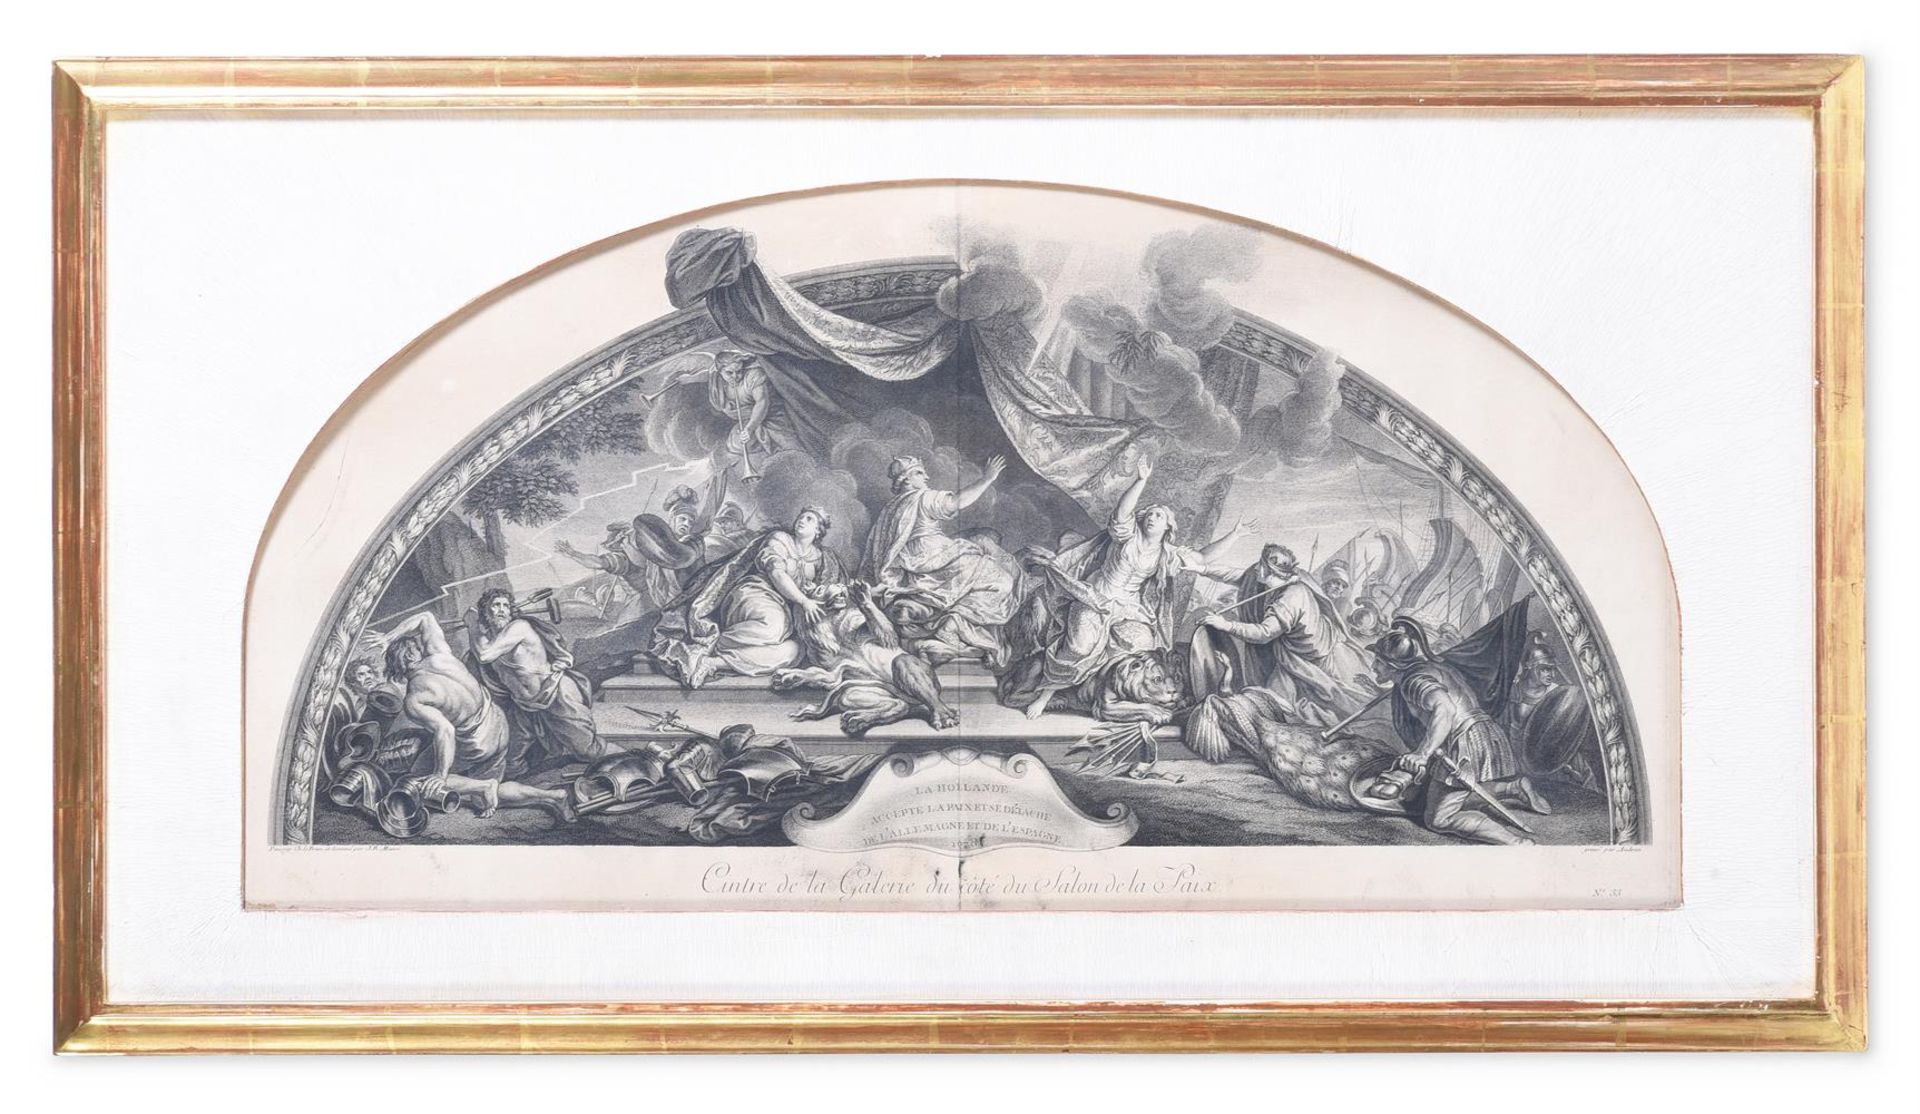 JEAN-BAPTISTE MASSÉ AFTER CHARLES LE BRUN, ALLEGORIES OF THE NEIGHBOURING COUNTRIES OF FRANCE - Image 7 of 16